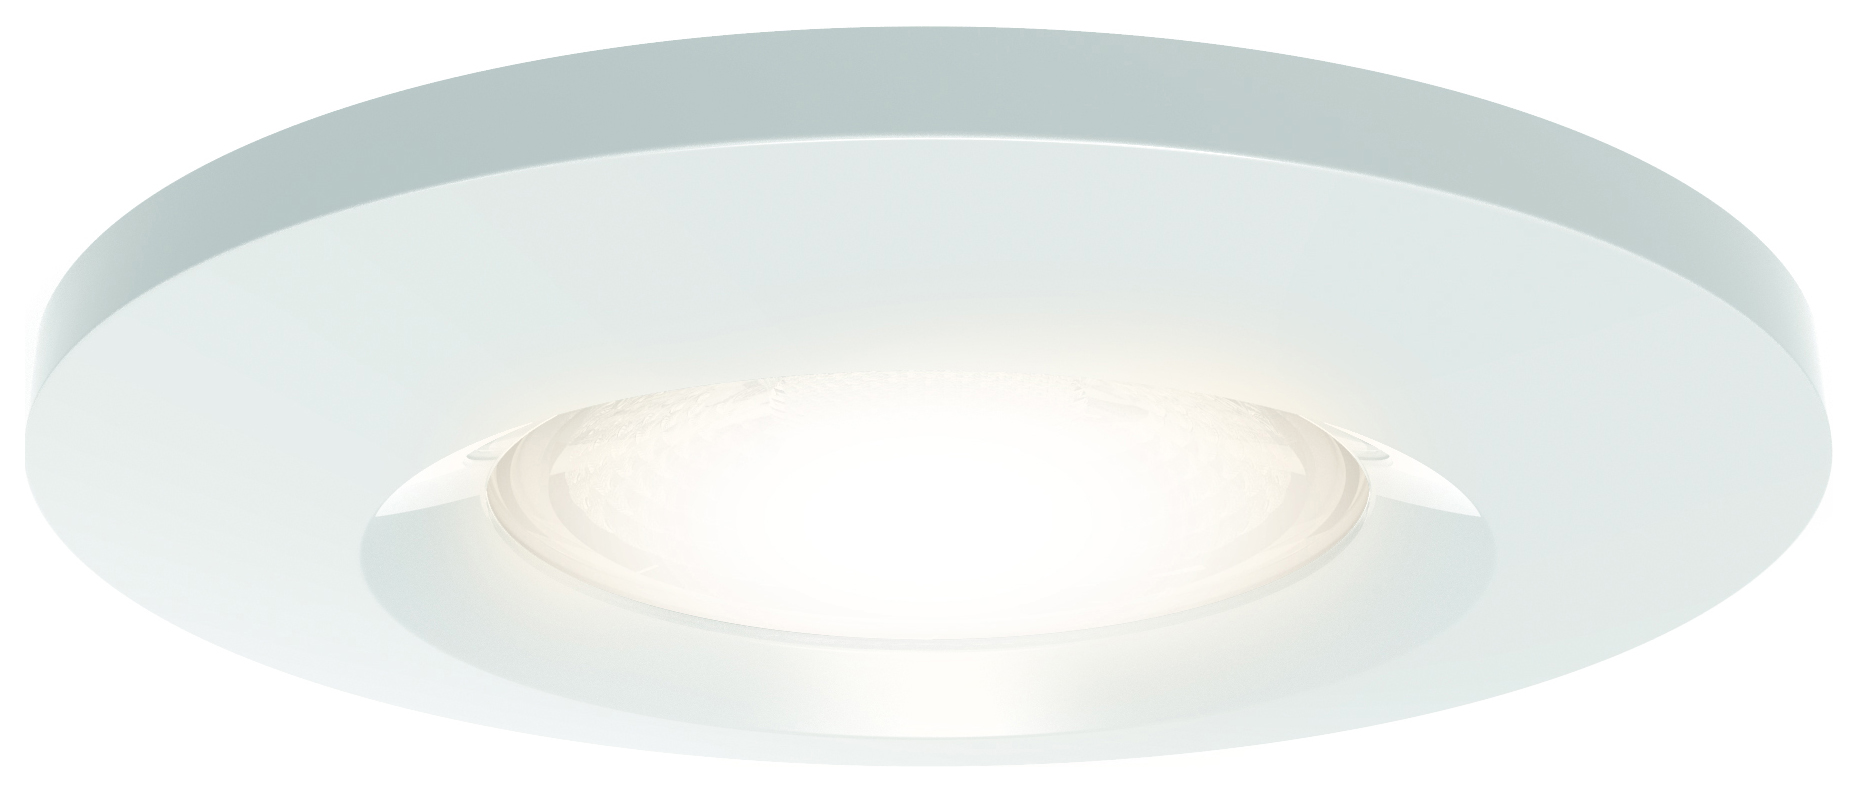 Image of 4Lite WiZ Connected IP65 Fire Rated LED Smart Downlight - 8W